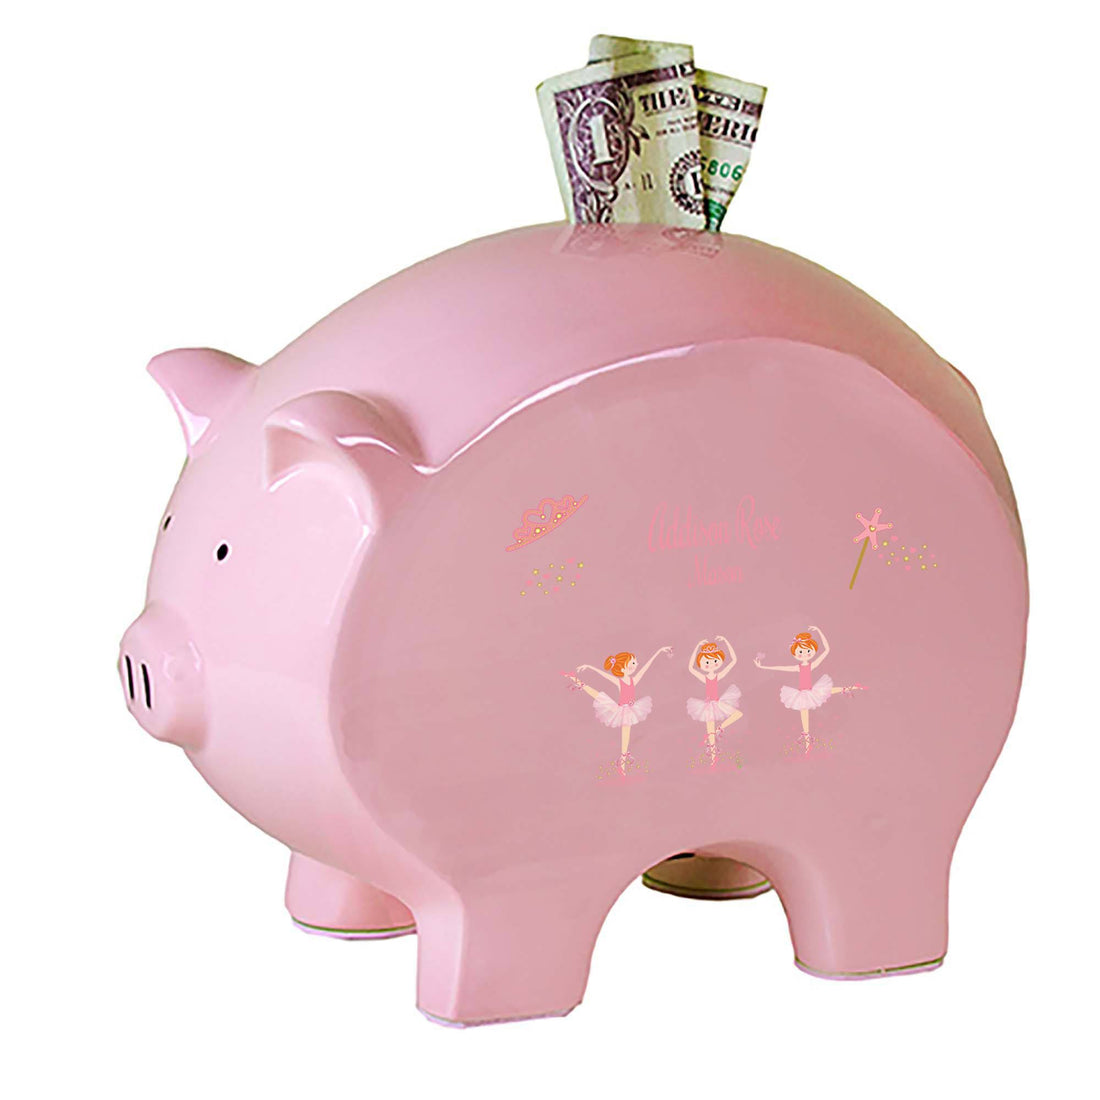 Personalized Pink Piggy Bank with Ballerina Red Hair design